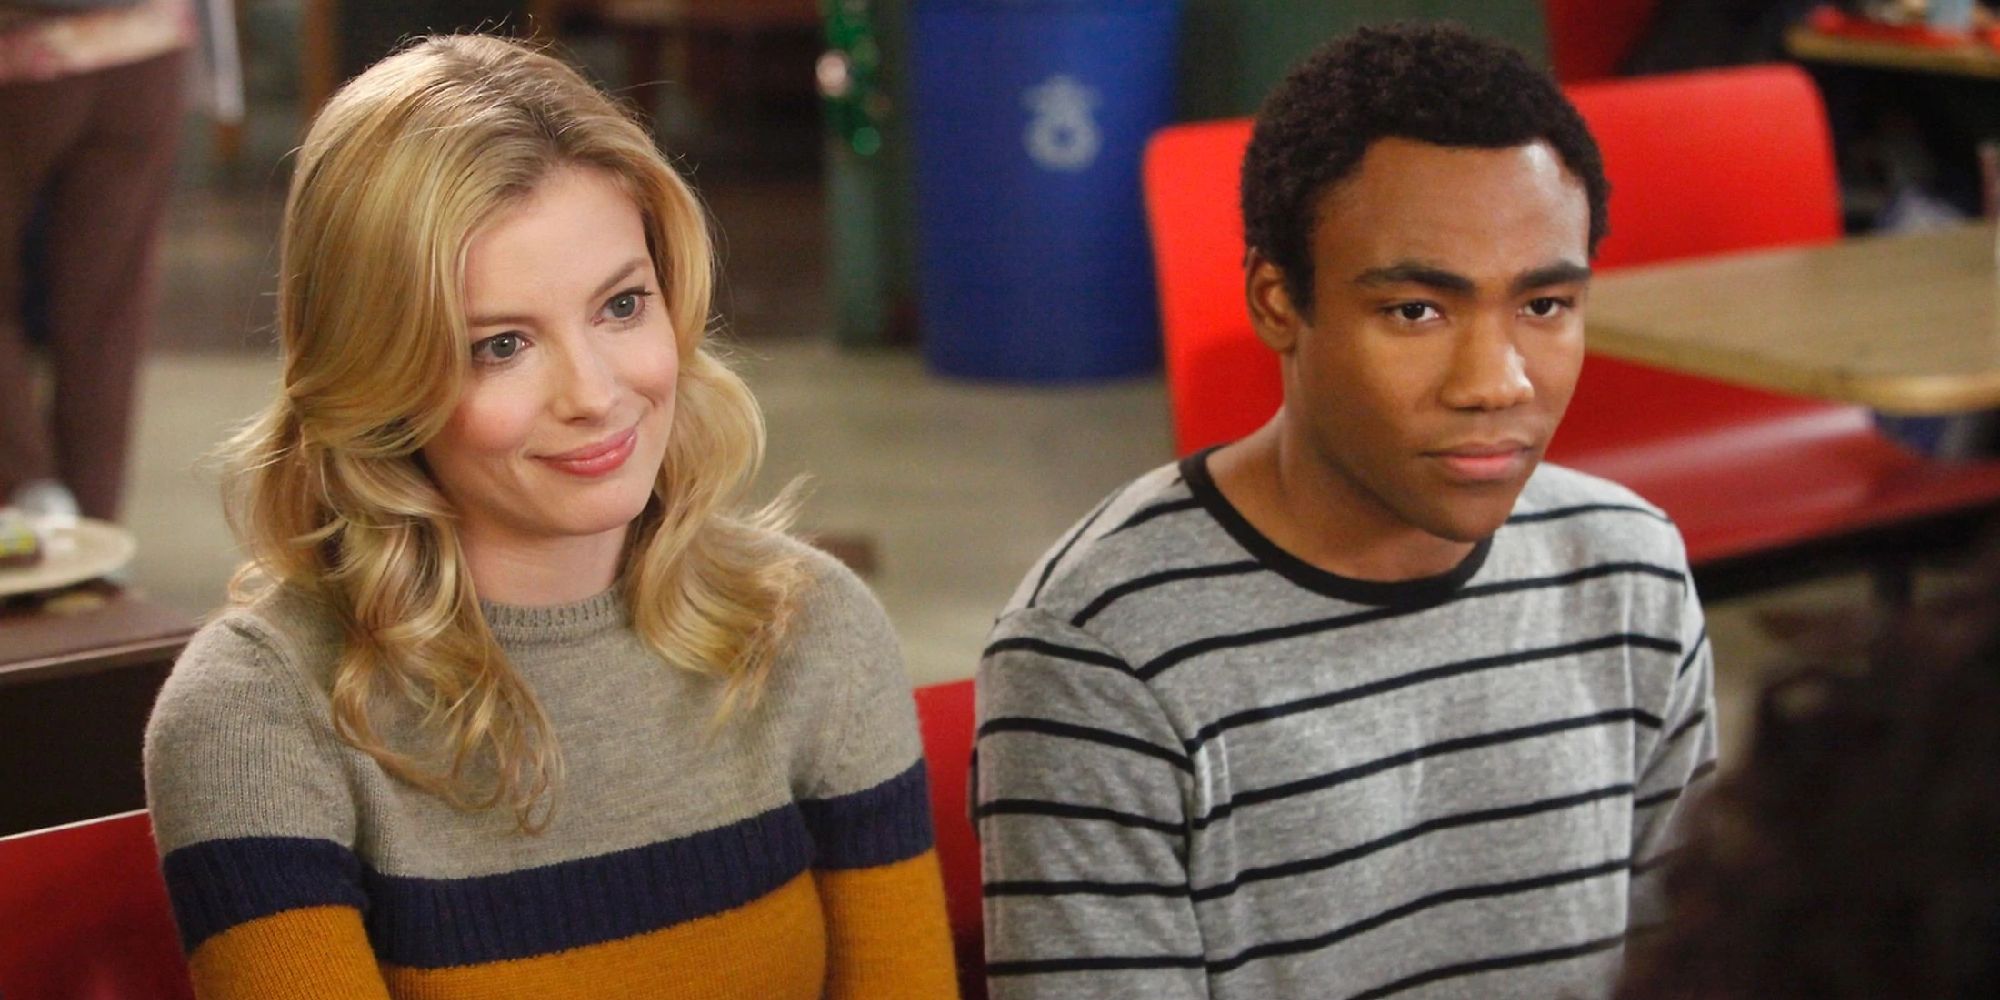 Donald Glover as Troy sitting next to Gillian Jacobs as Britta in Greendale's cafeteria